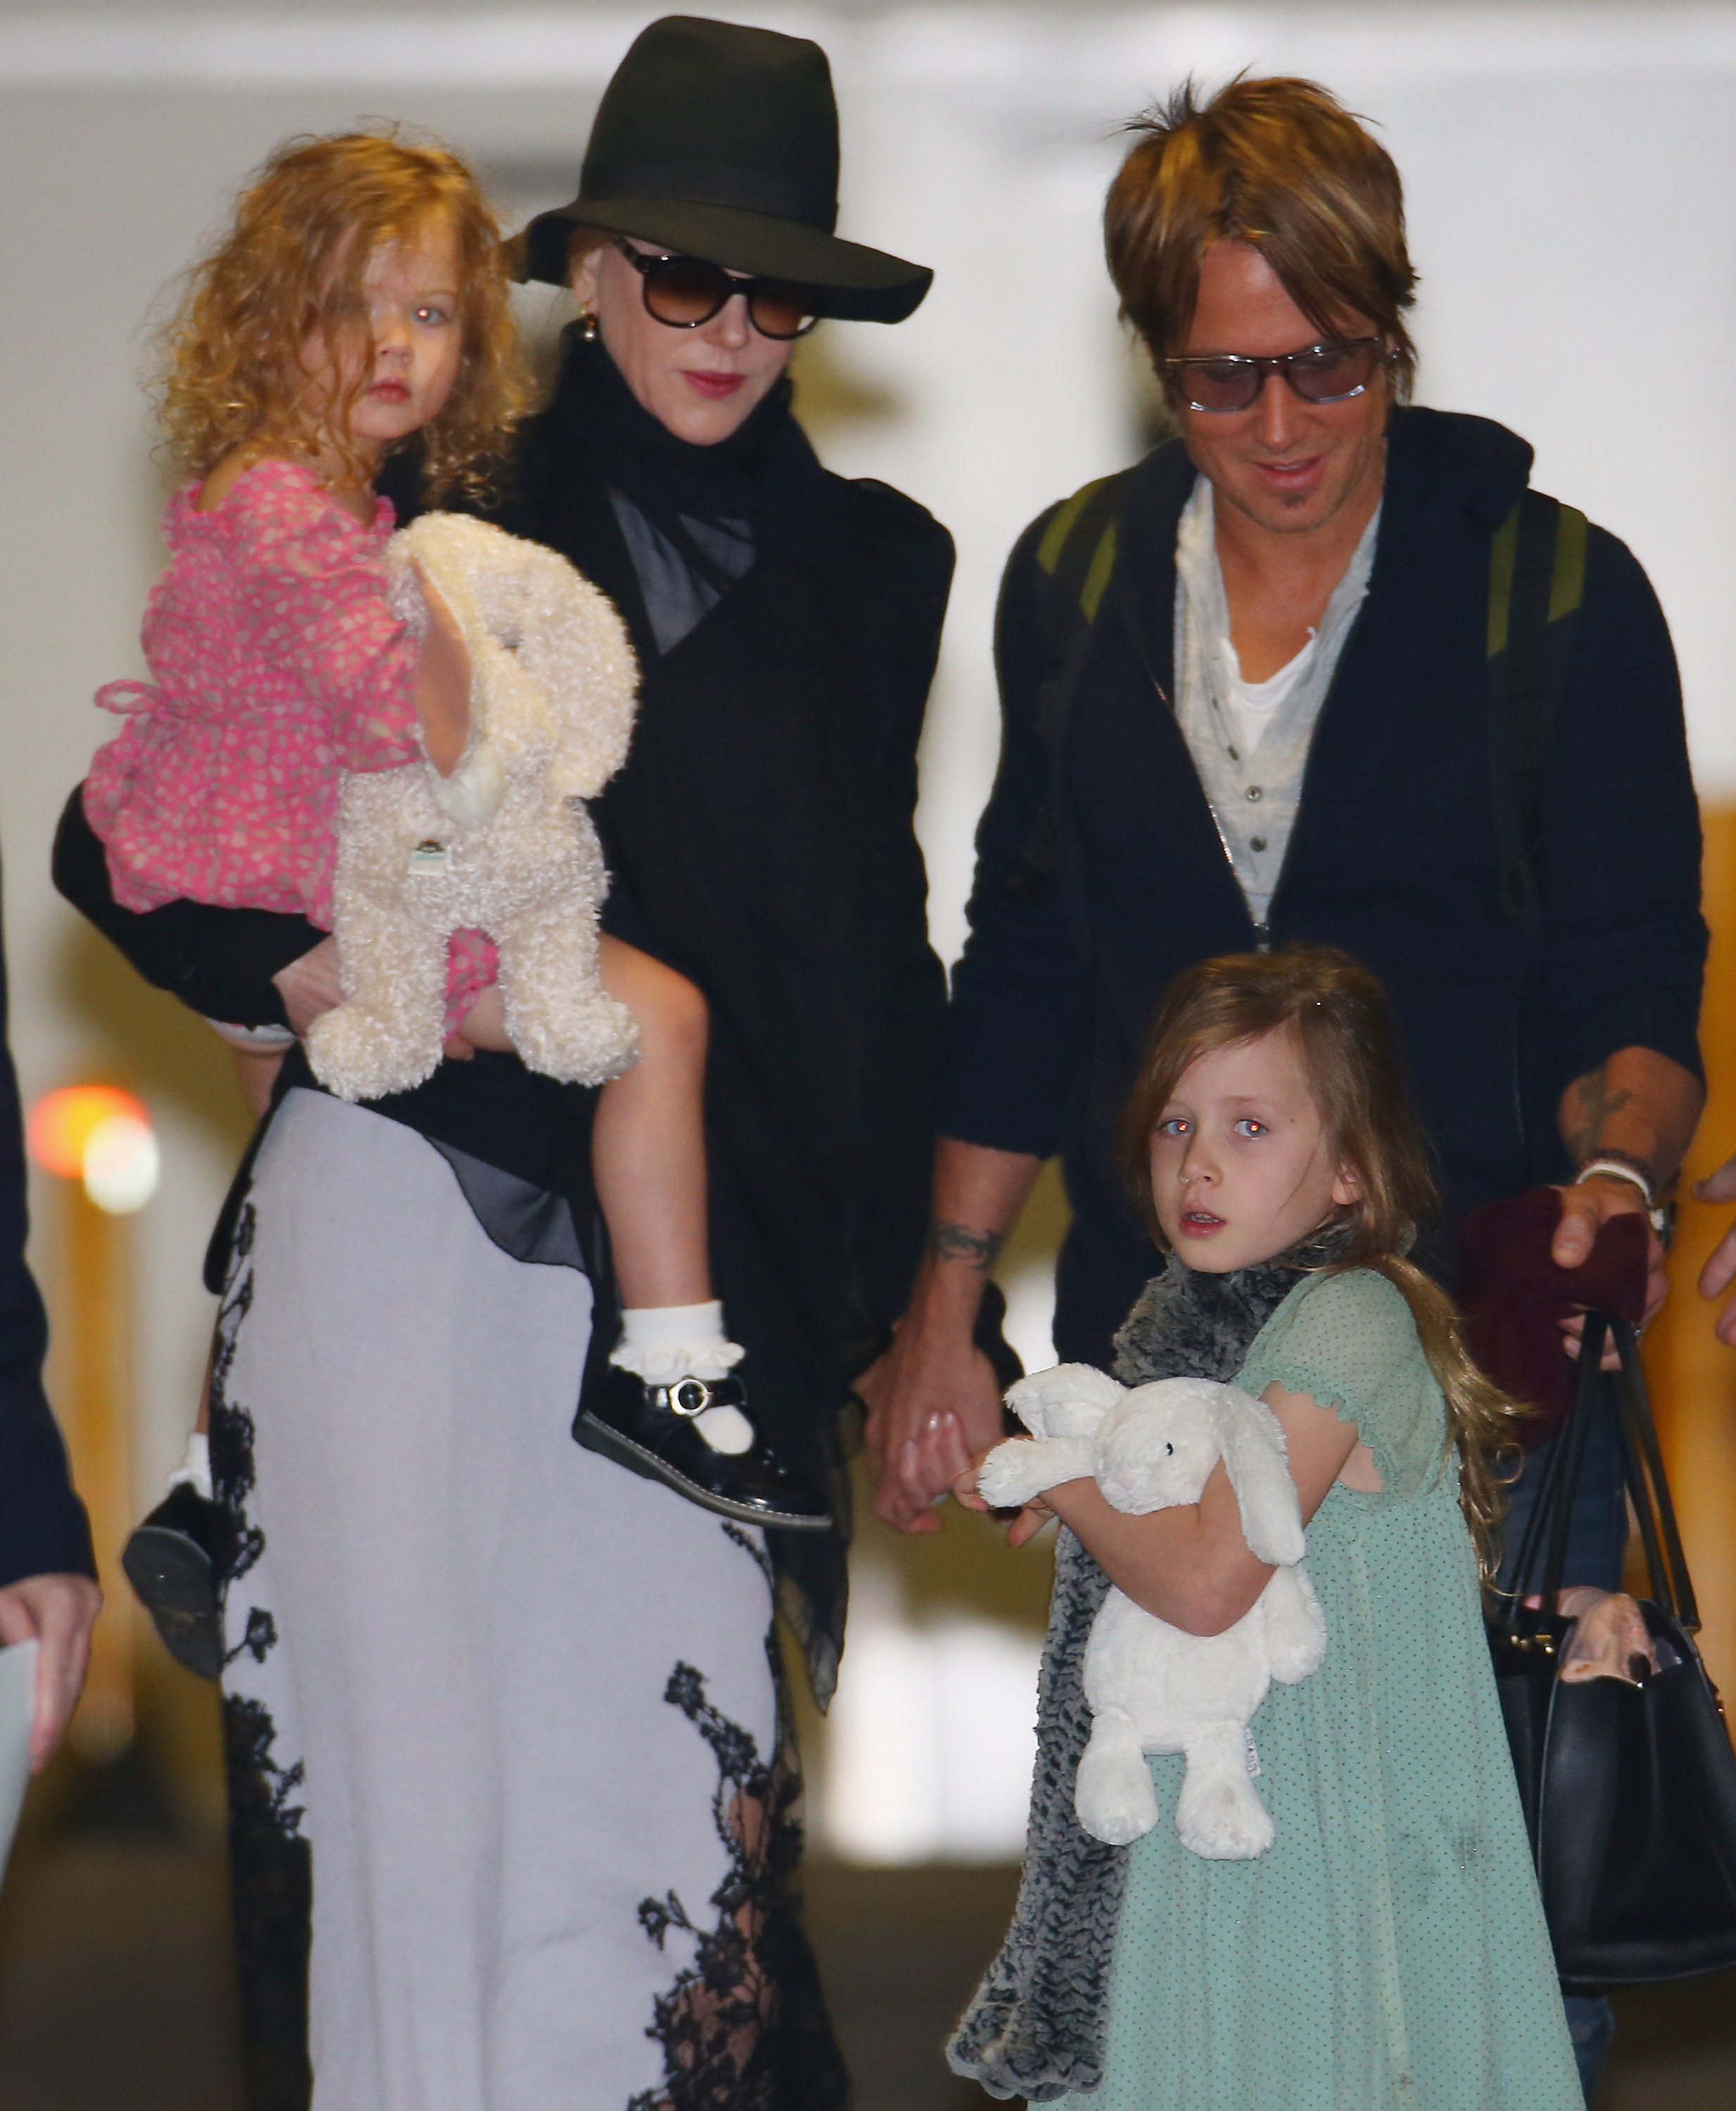 Nicole Kidman and Keith Urban with their daughters, Faith and Sunday Kidman-Urban spotted in Sydney, 2014 | Source: Getty Images